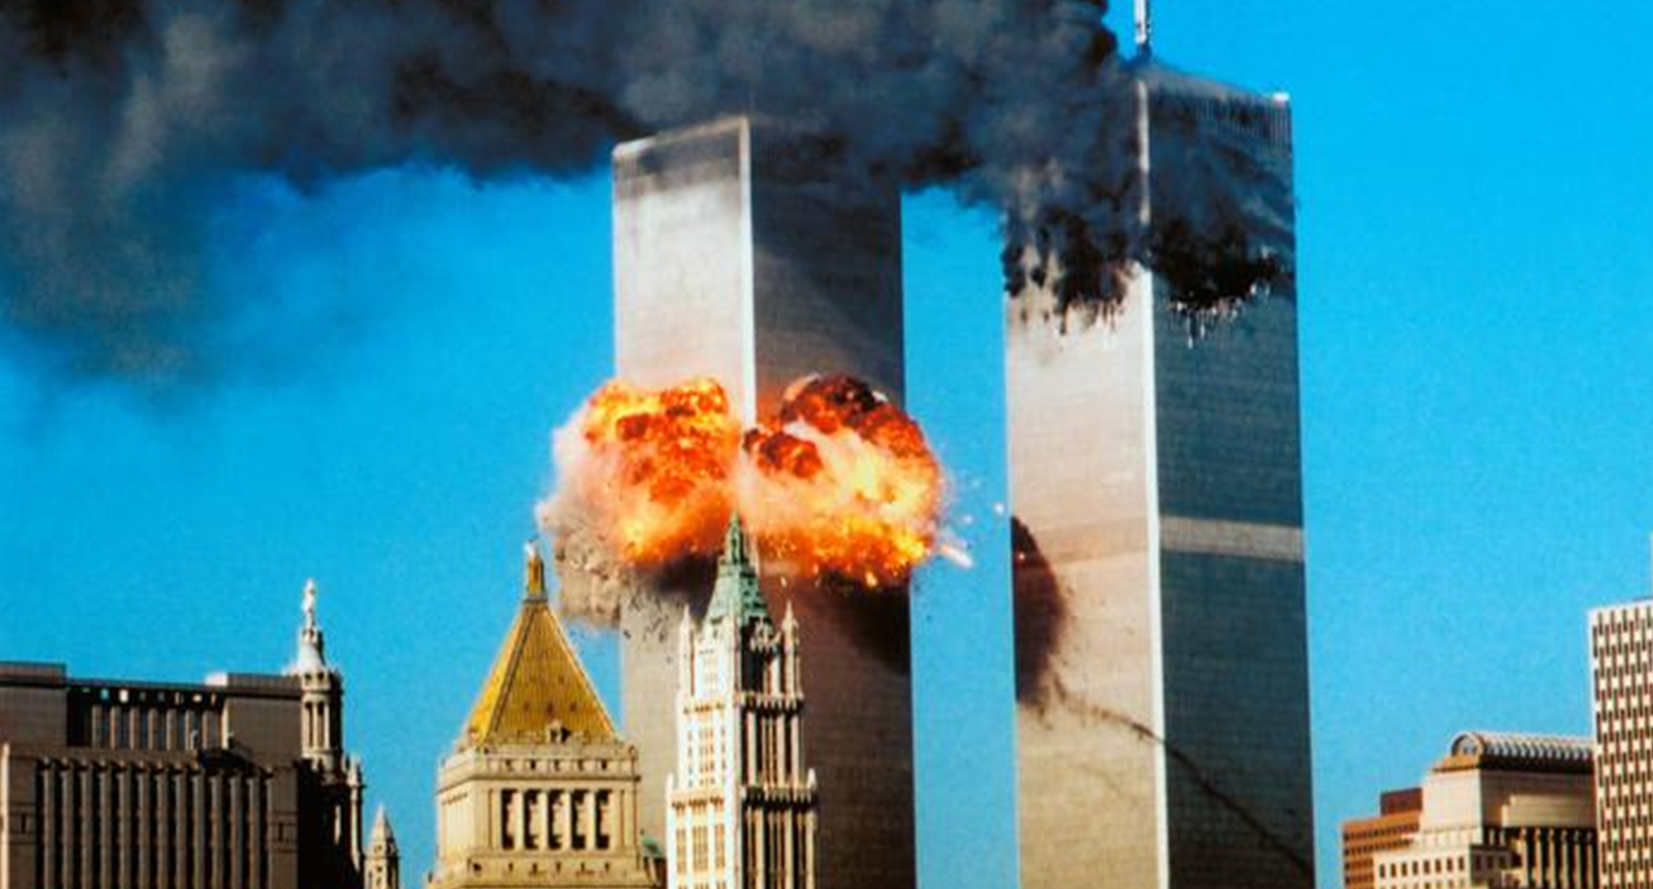 Federal Grand Jury Will Finally Hear Evidence Of A Controlled Demolition On 9/11